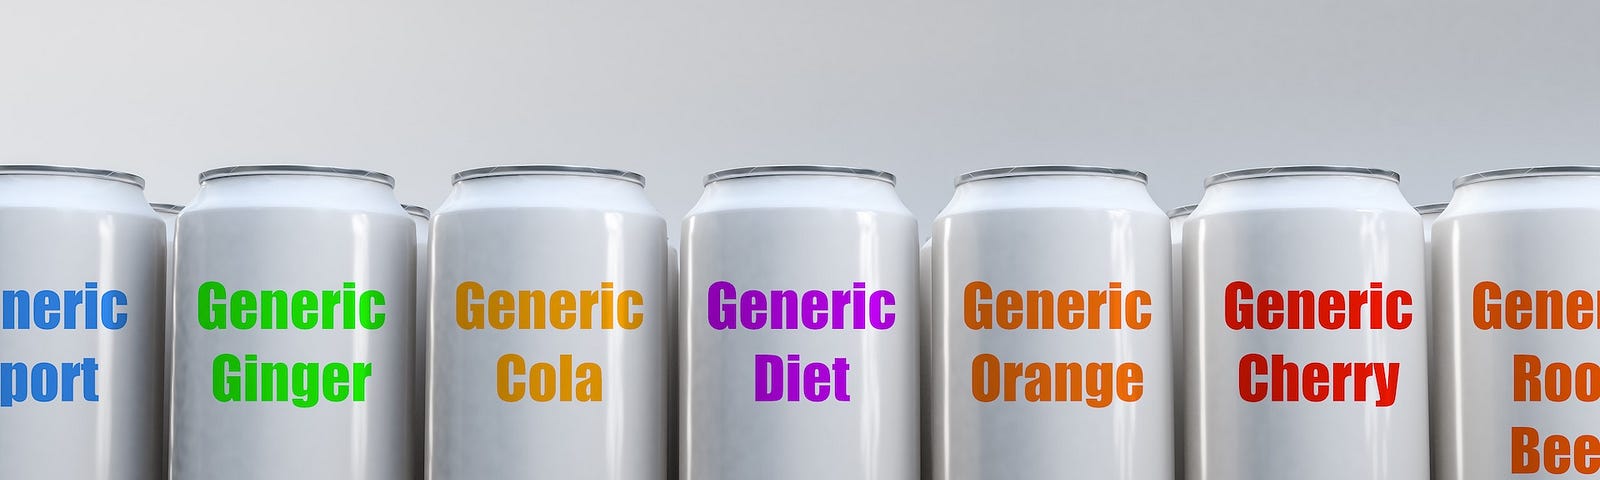 Cans containing various flavors of generic soda. I hope you appreciate that this is the thinnest possible metaphor for this post.